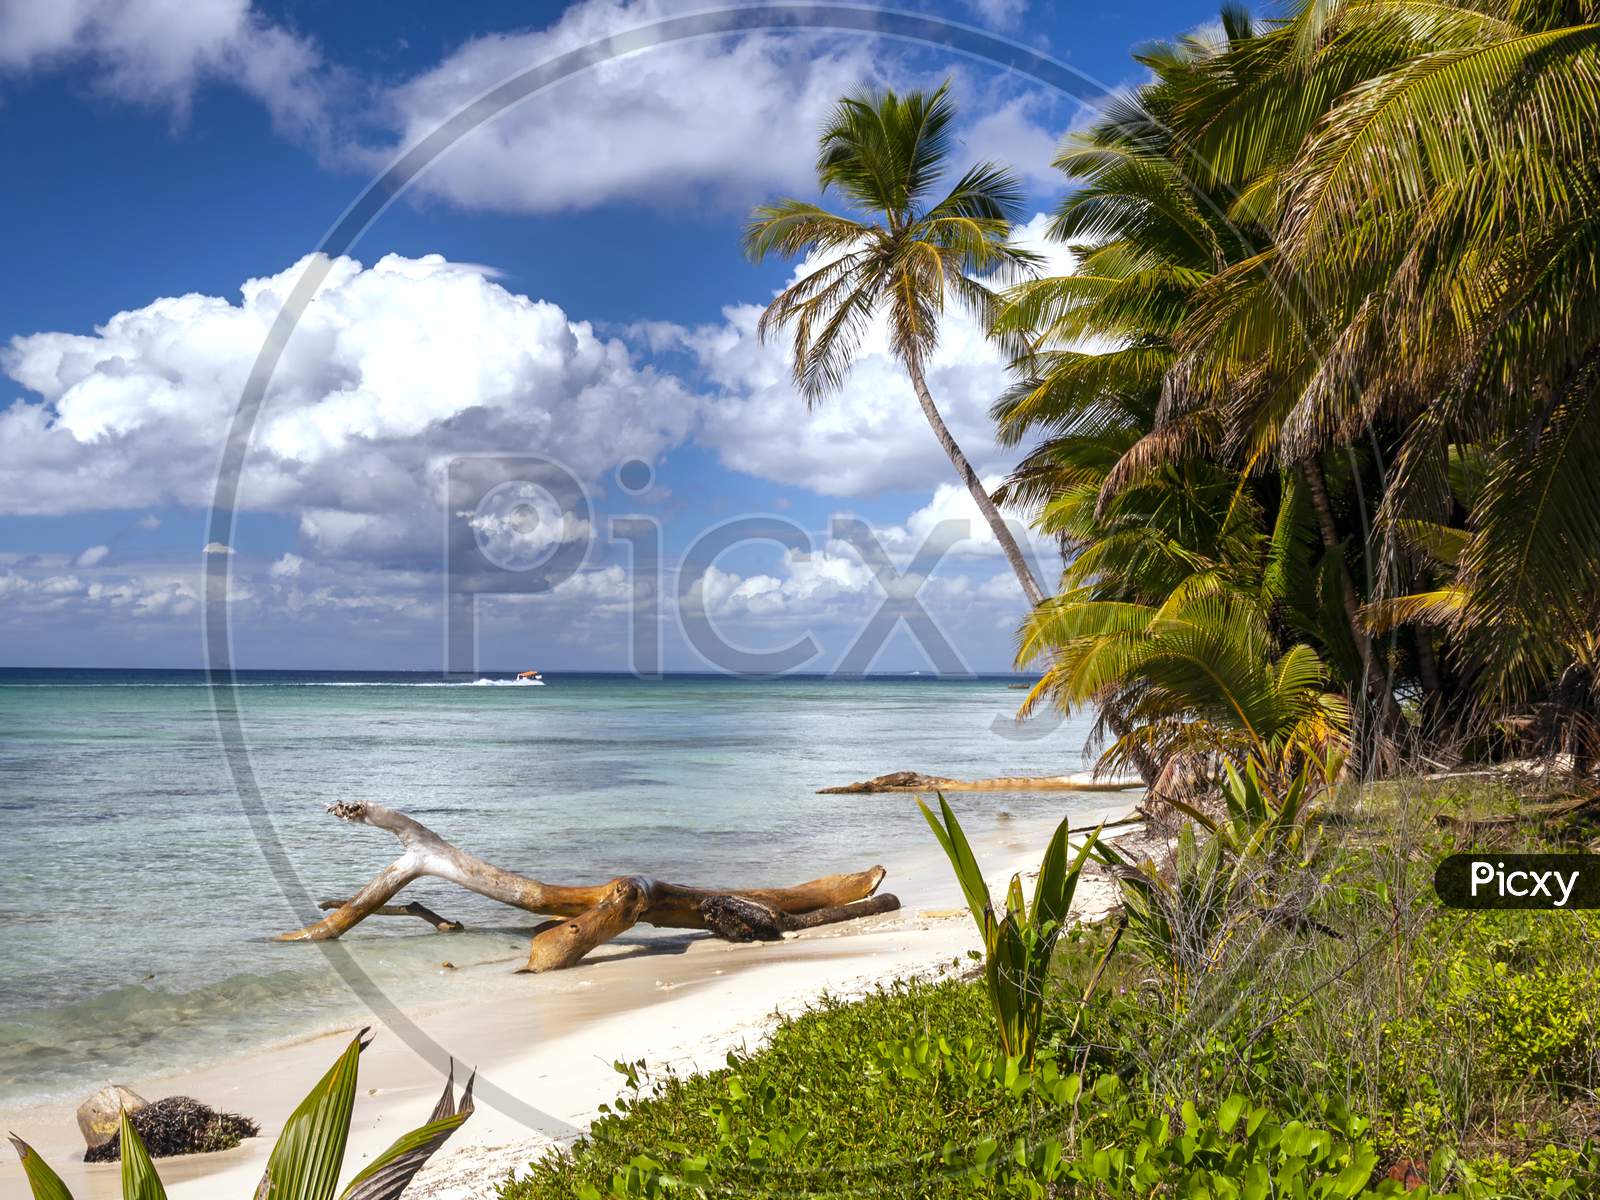 A horizontal shot of a Caribbean beach with white sand Palm trees and some driftwood